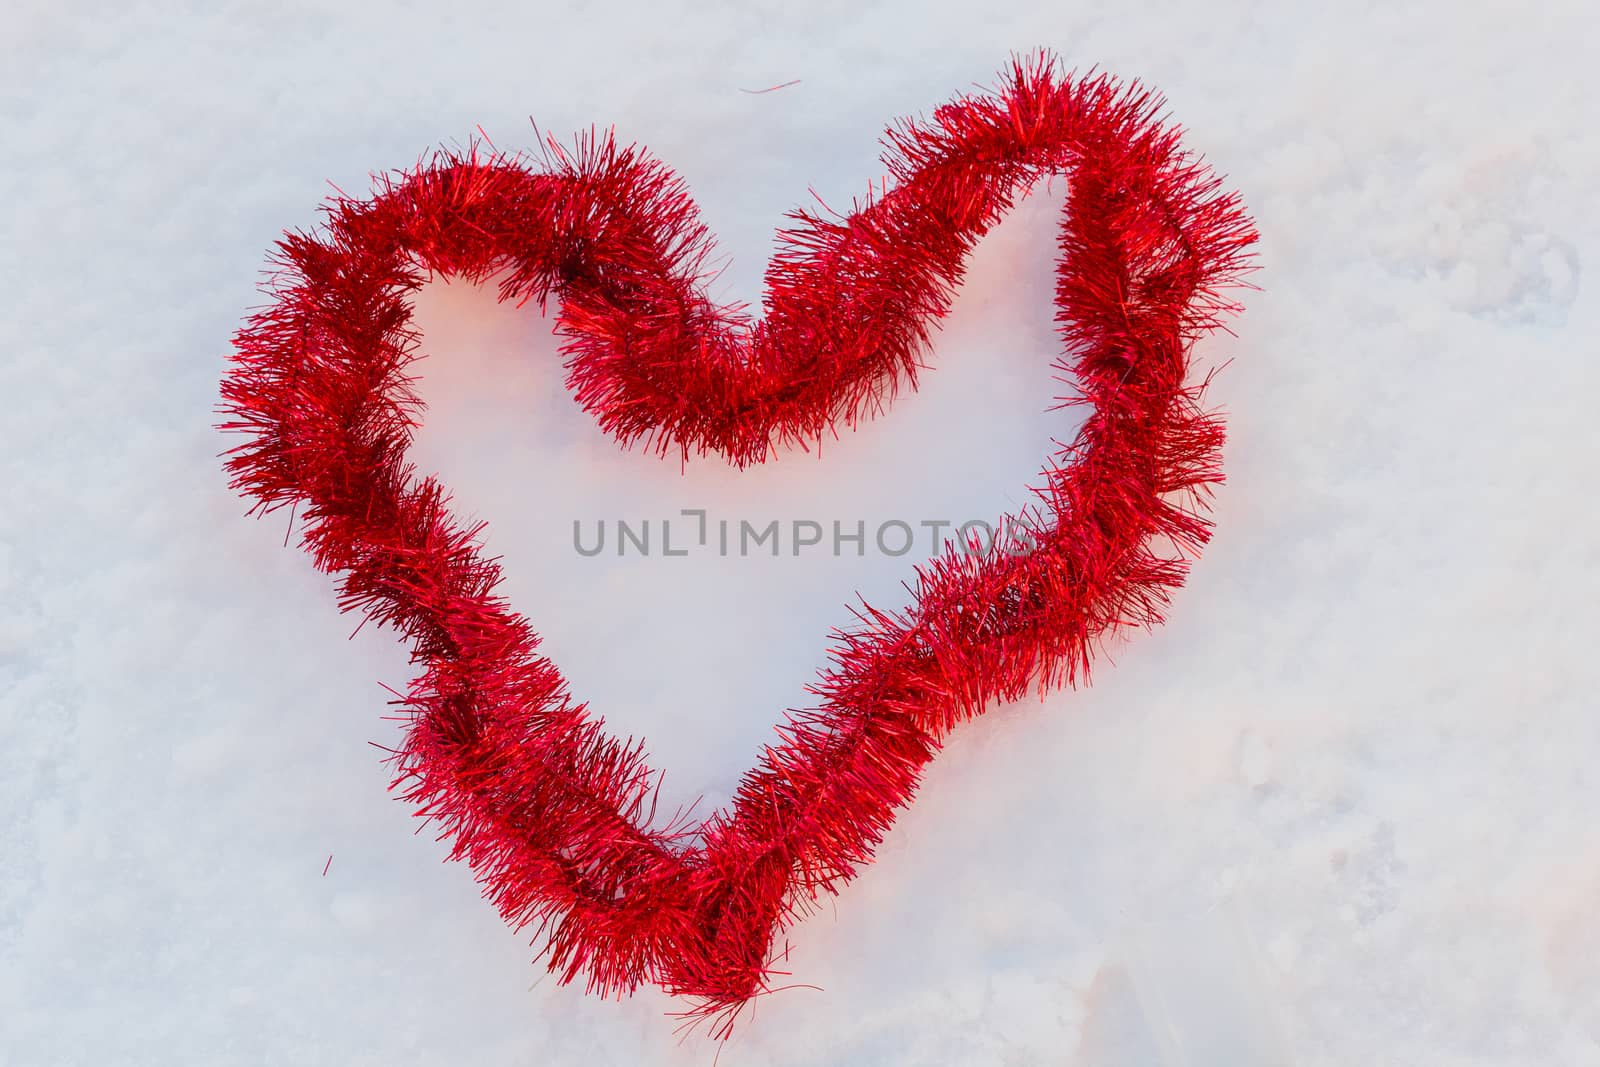 a red heart in the snow made of christmas wires by moorea